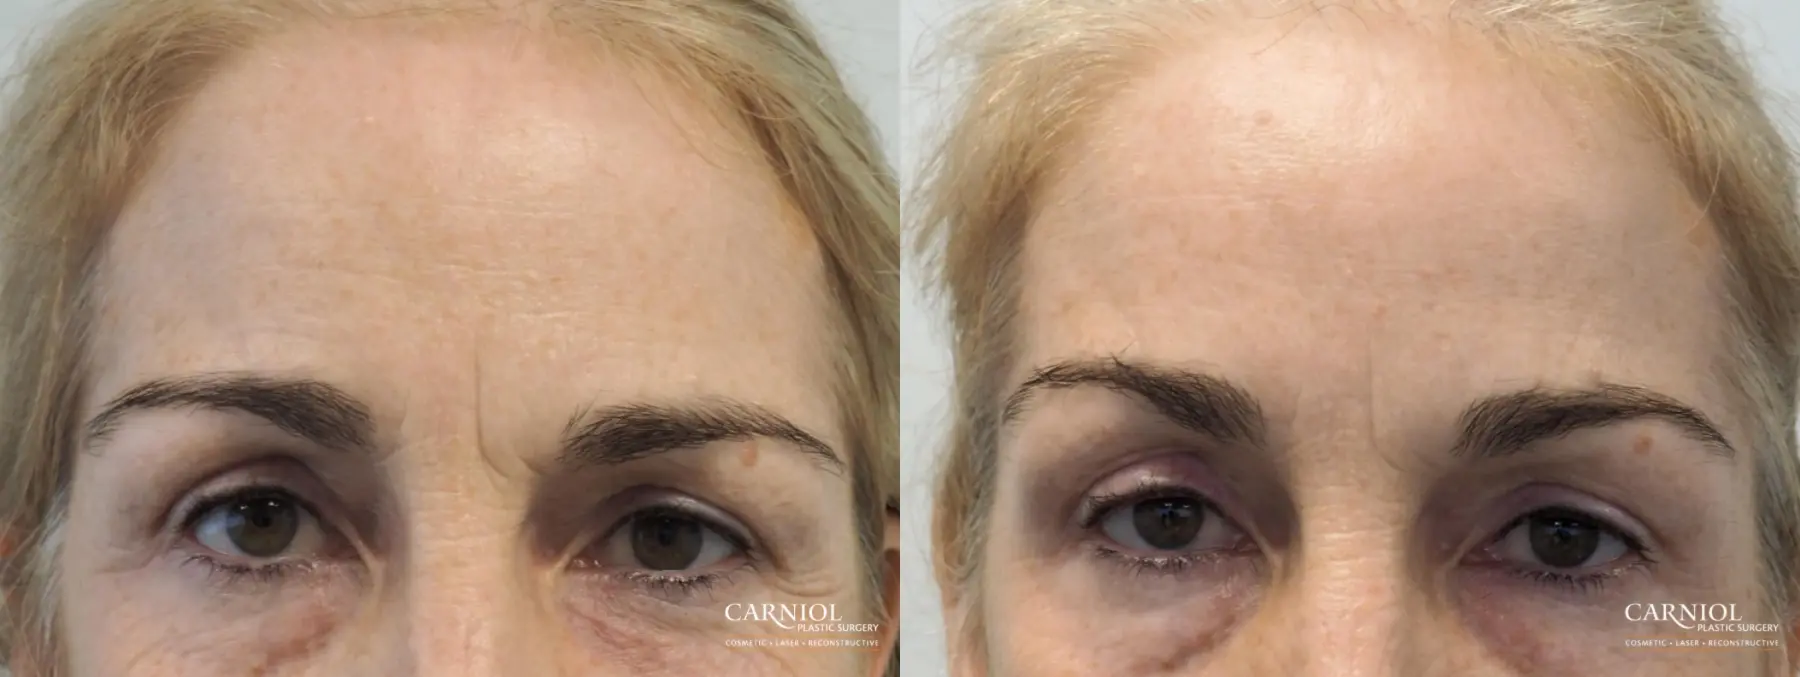 BOTOX® Cosmetic: Patient 5 - Before and After 1